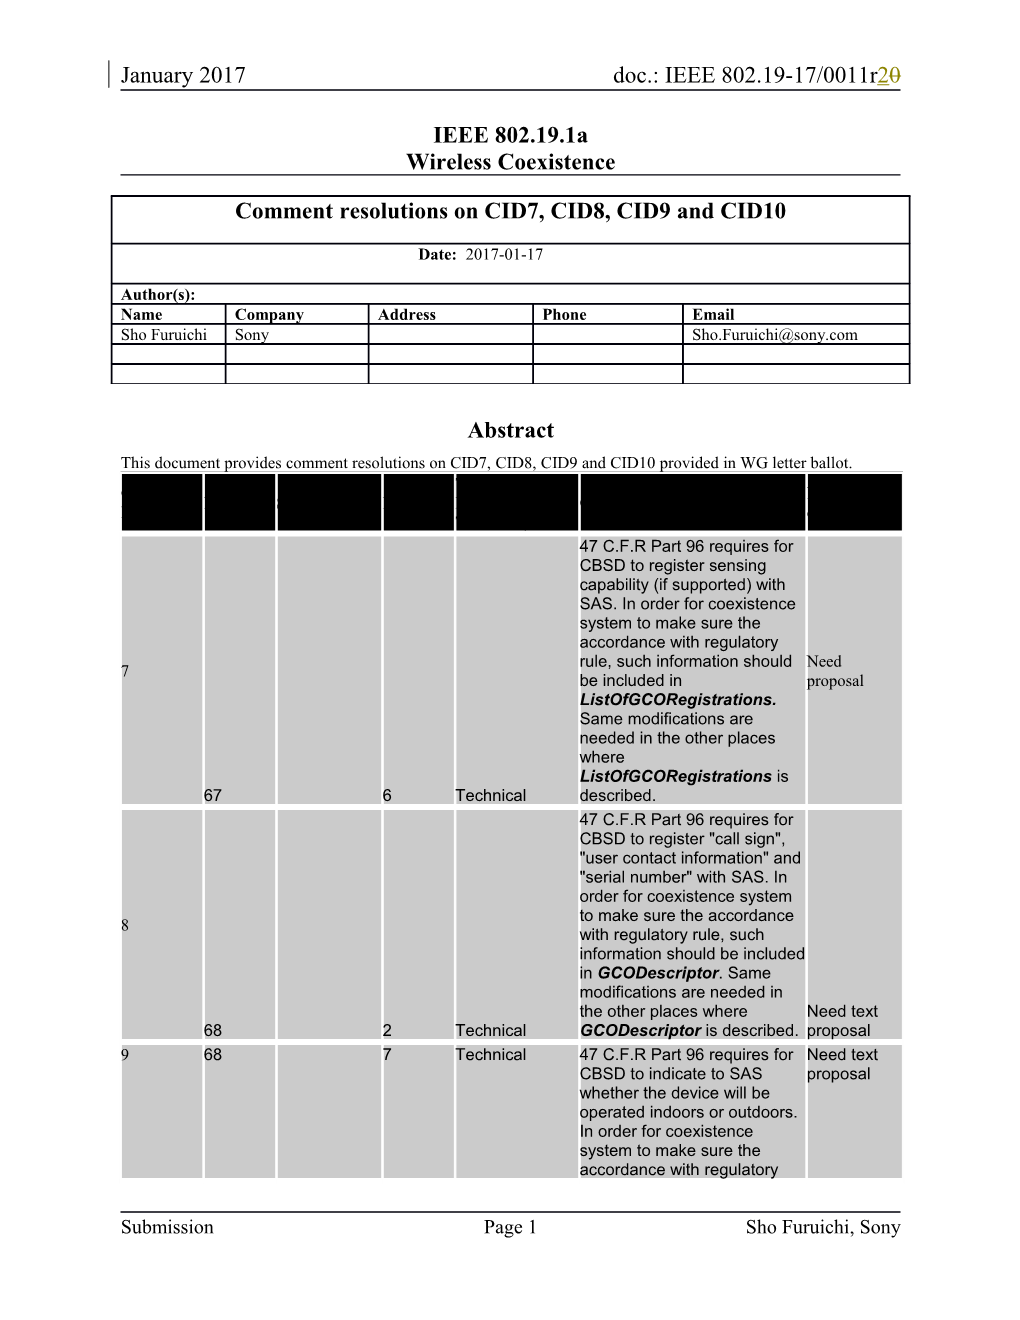 This Document Provides Comment Resolutionsoncid7, CID8, Cid9and CID10 Provided in WG Letter